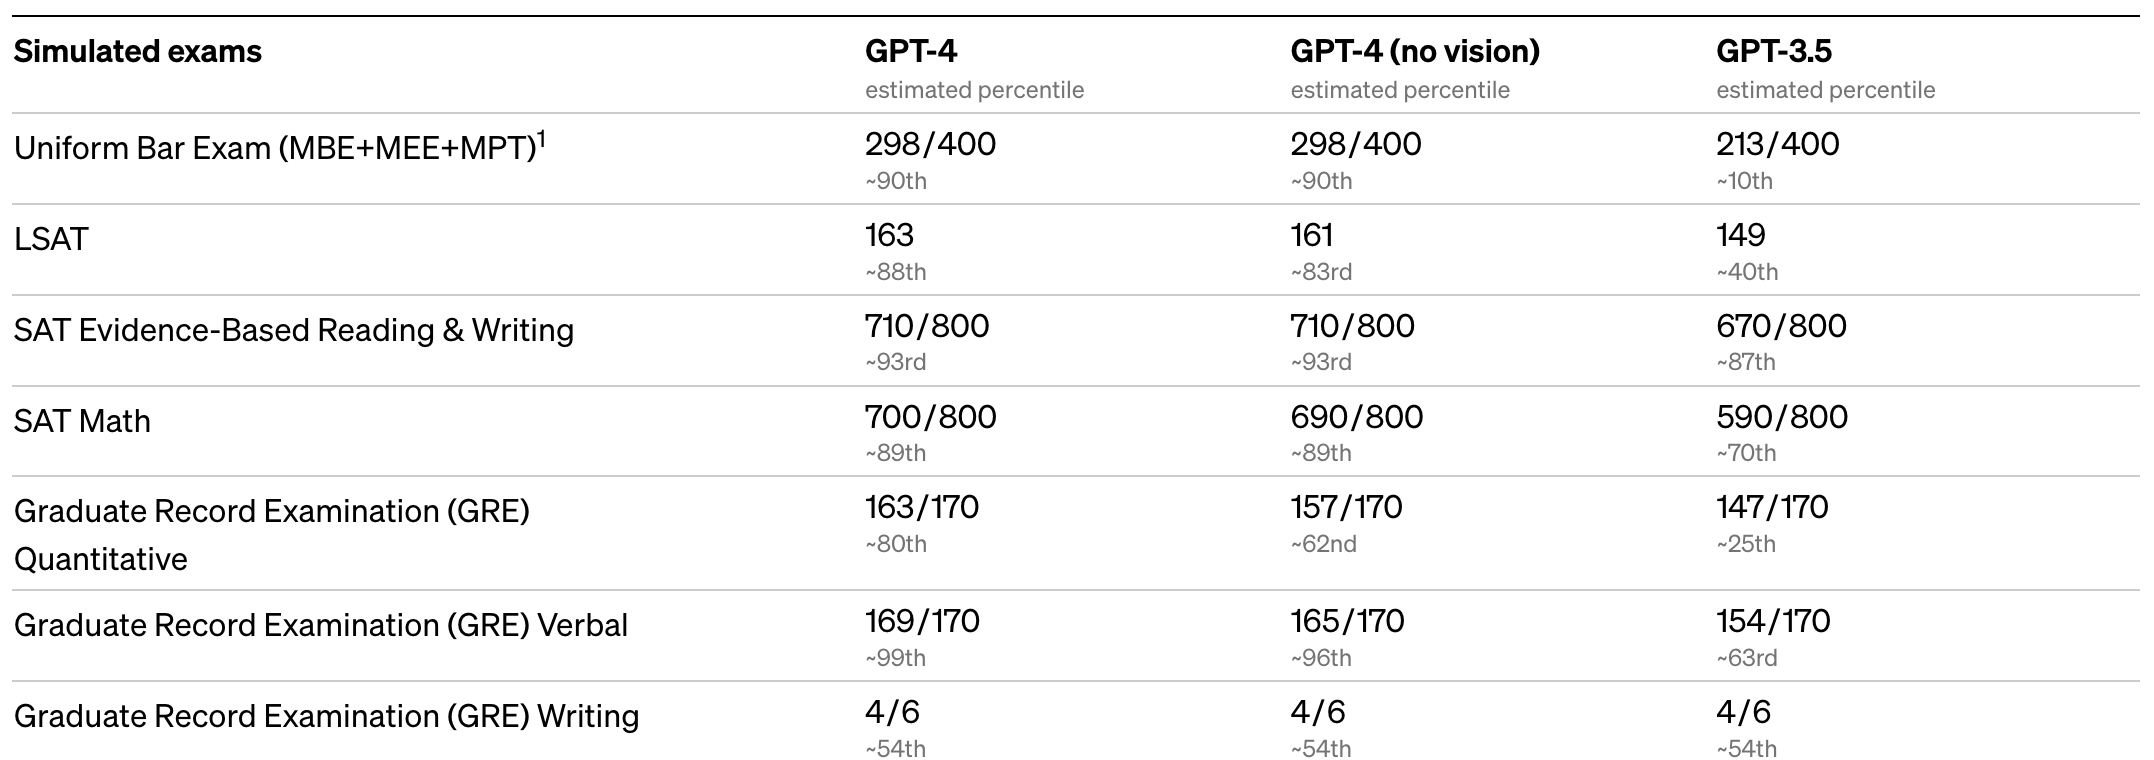 GPT-4 is here. How does it compare to GPT-3.5?